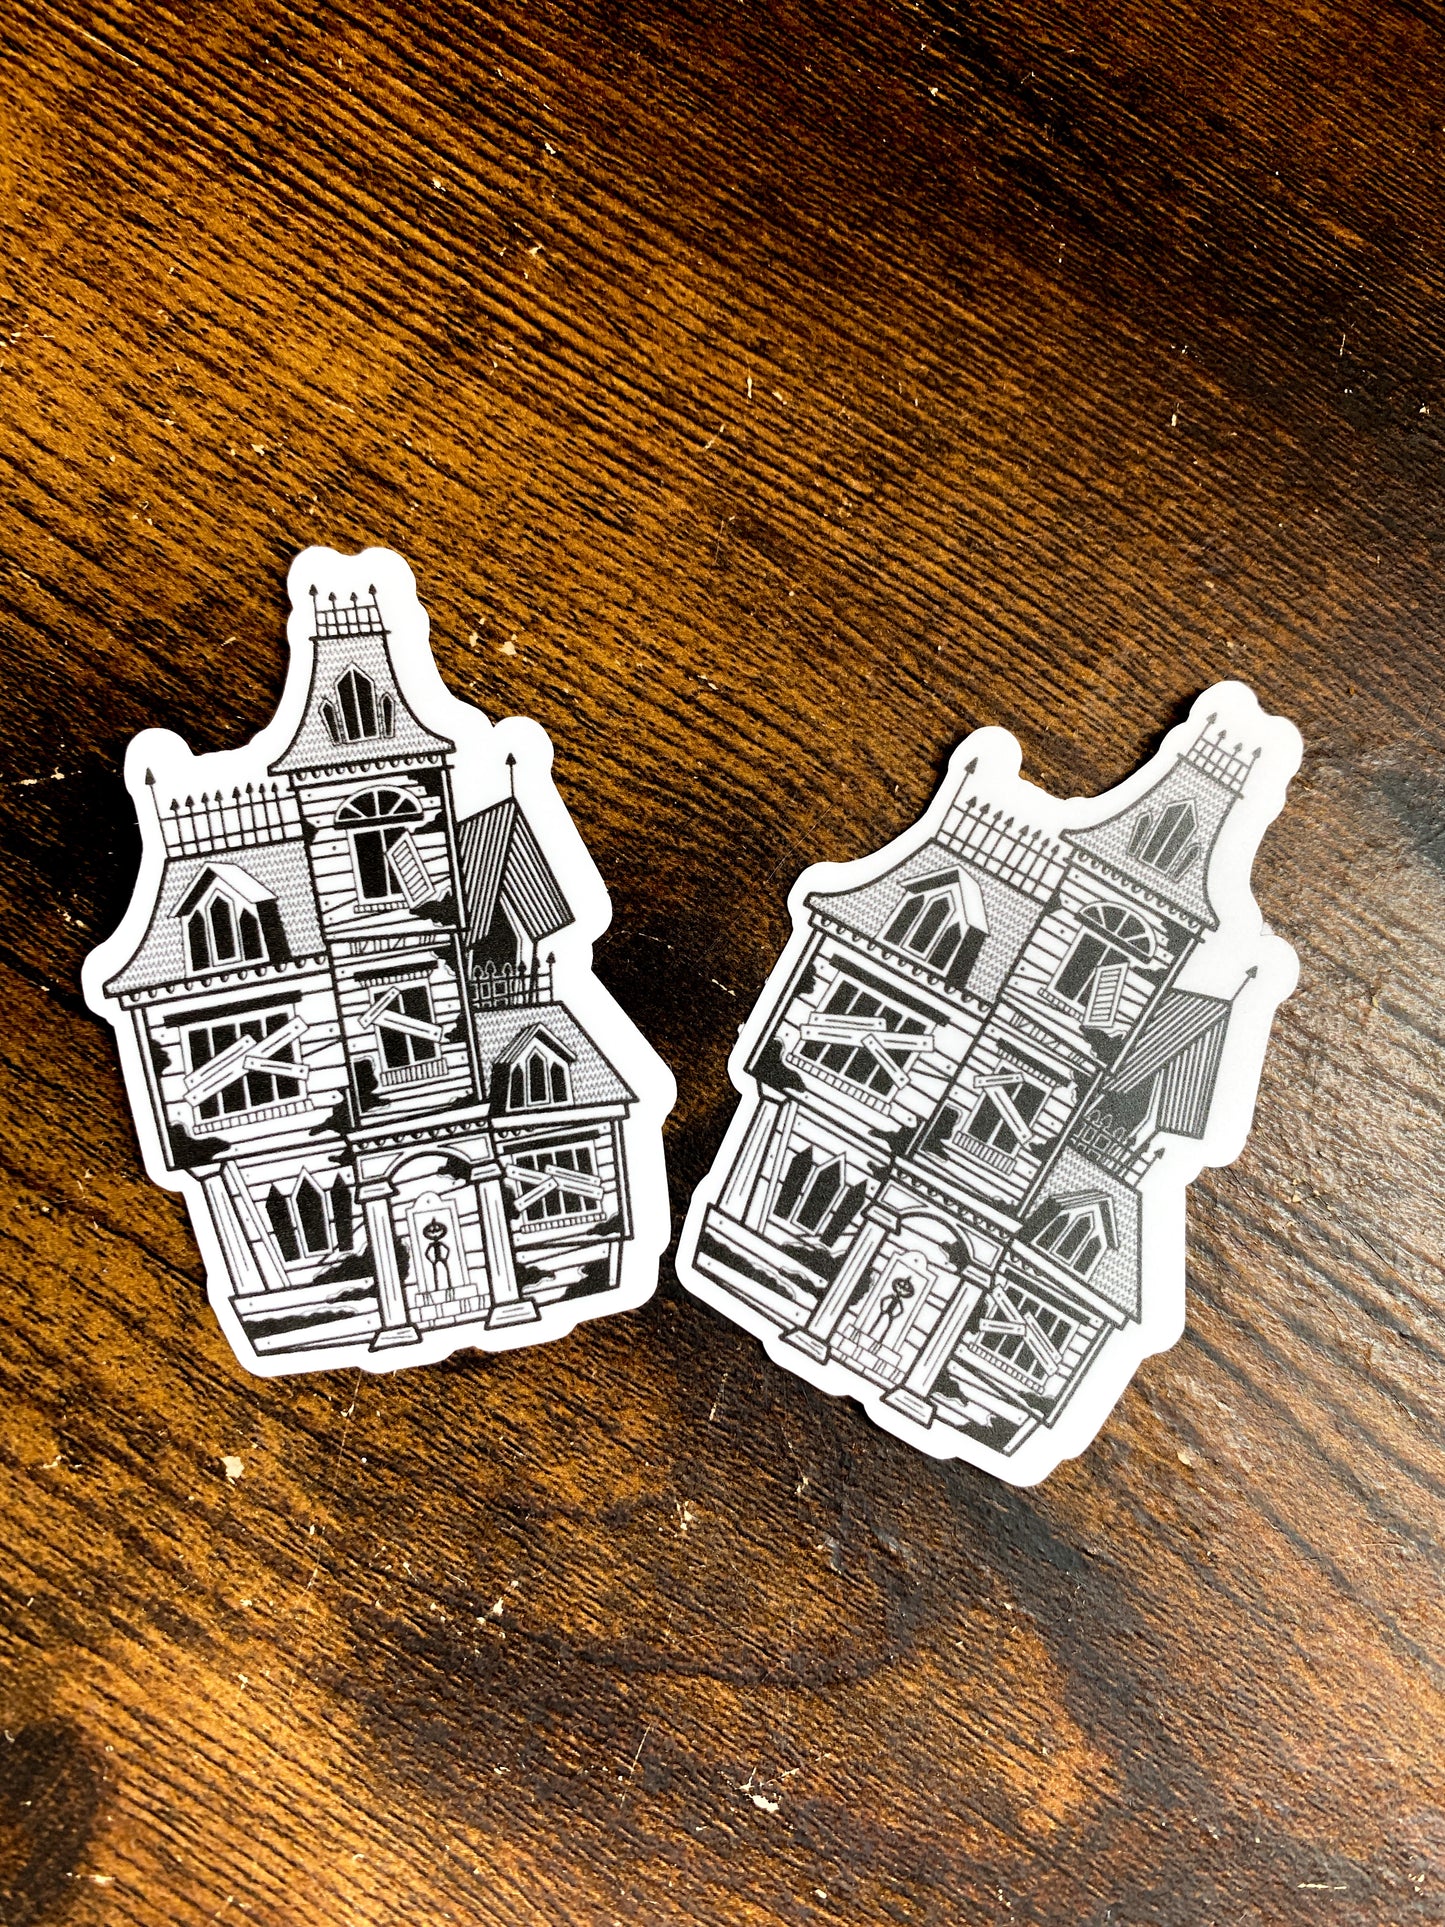 2 haunted home stickers with line work and pattern. Pumpkin king standing in the doorway.